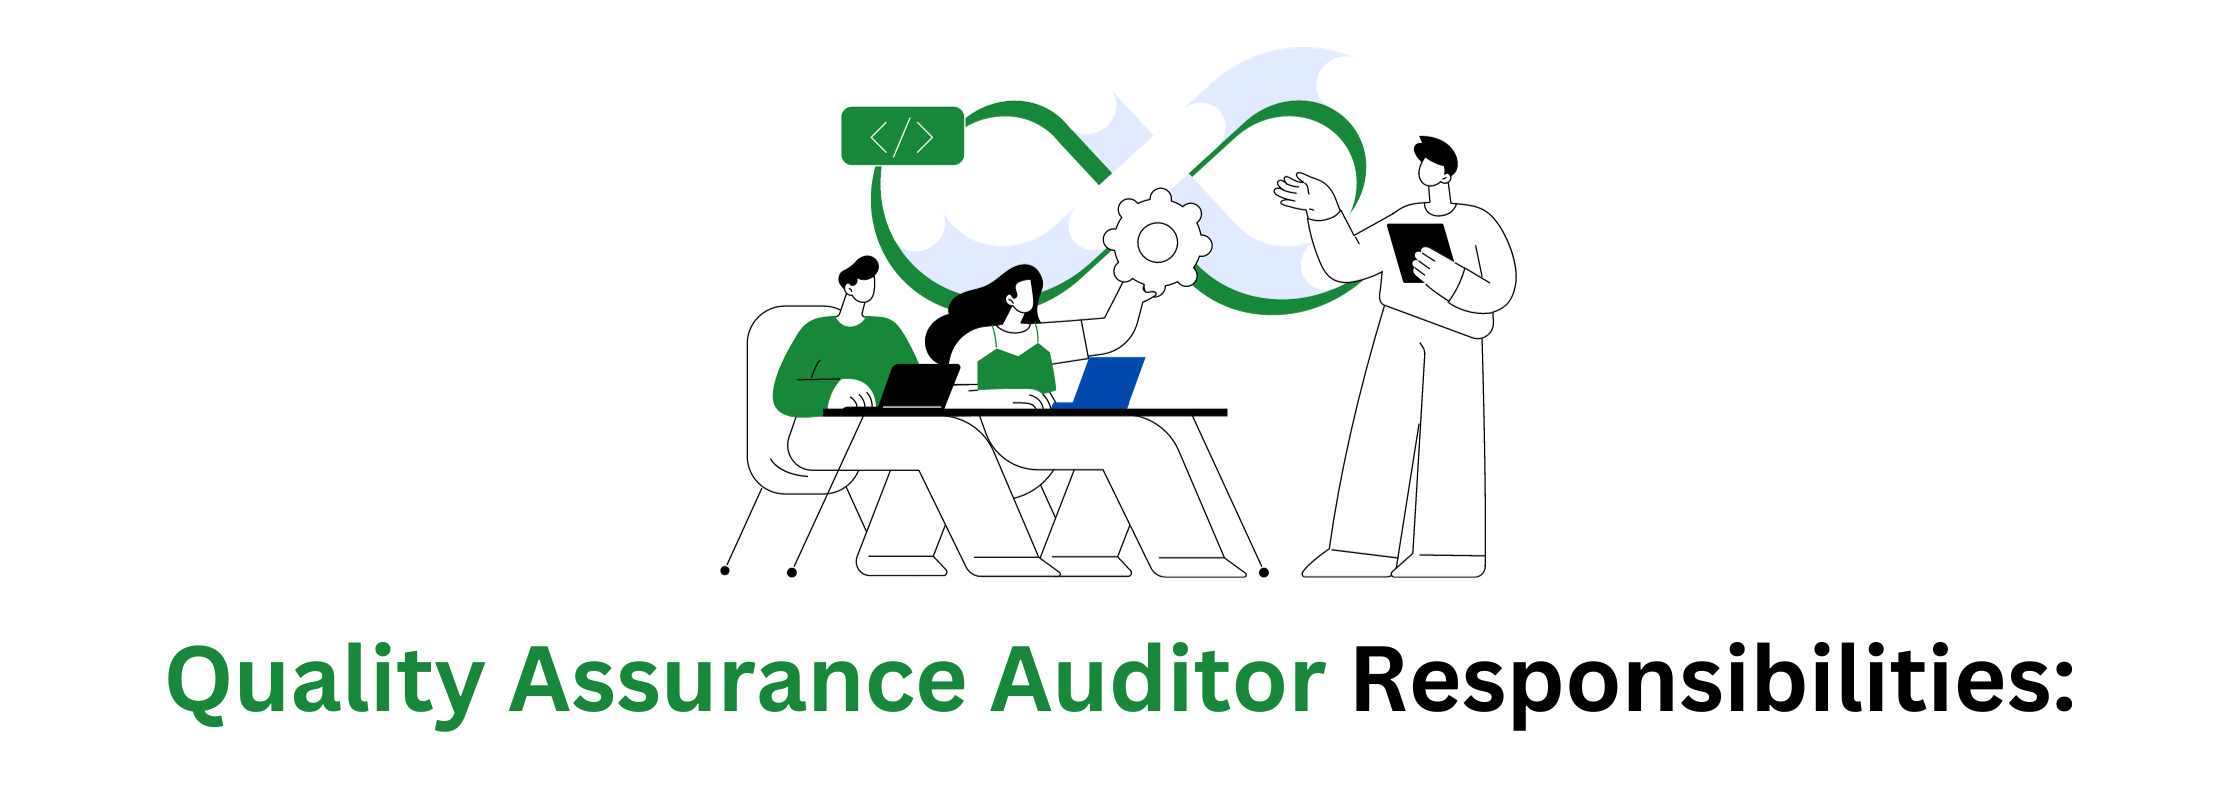 Quality Assurance Auditor Responsibilities